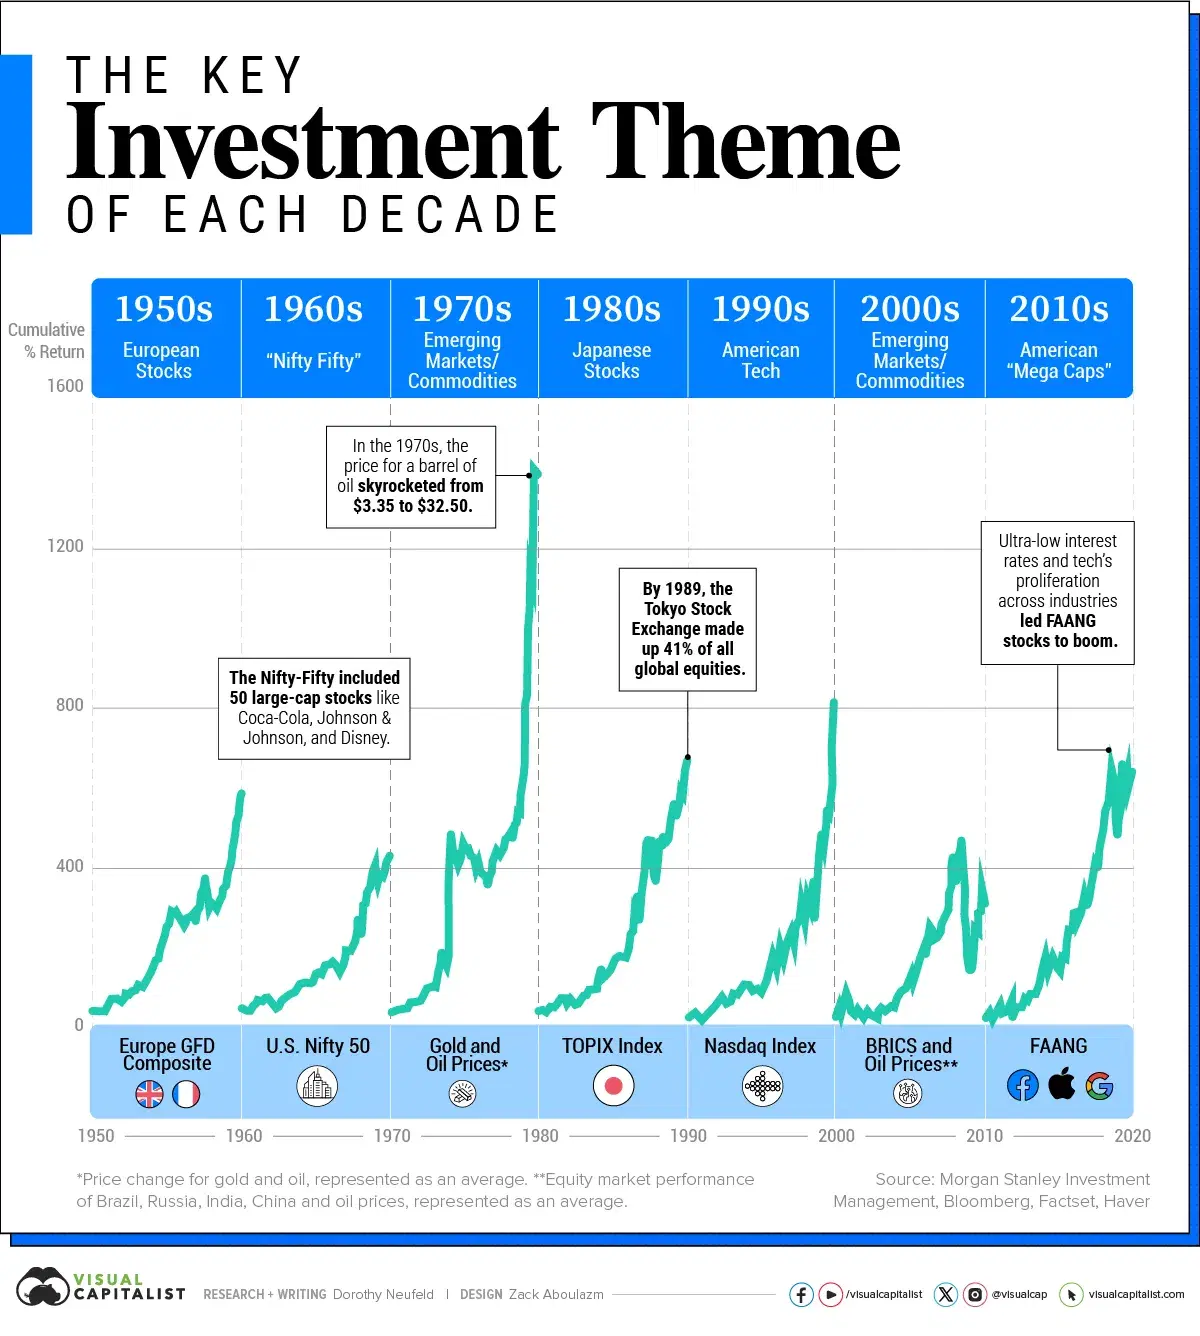 Here's What Drove Returns Over the Past 7 Decades 🚀